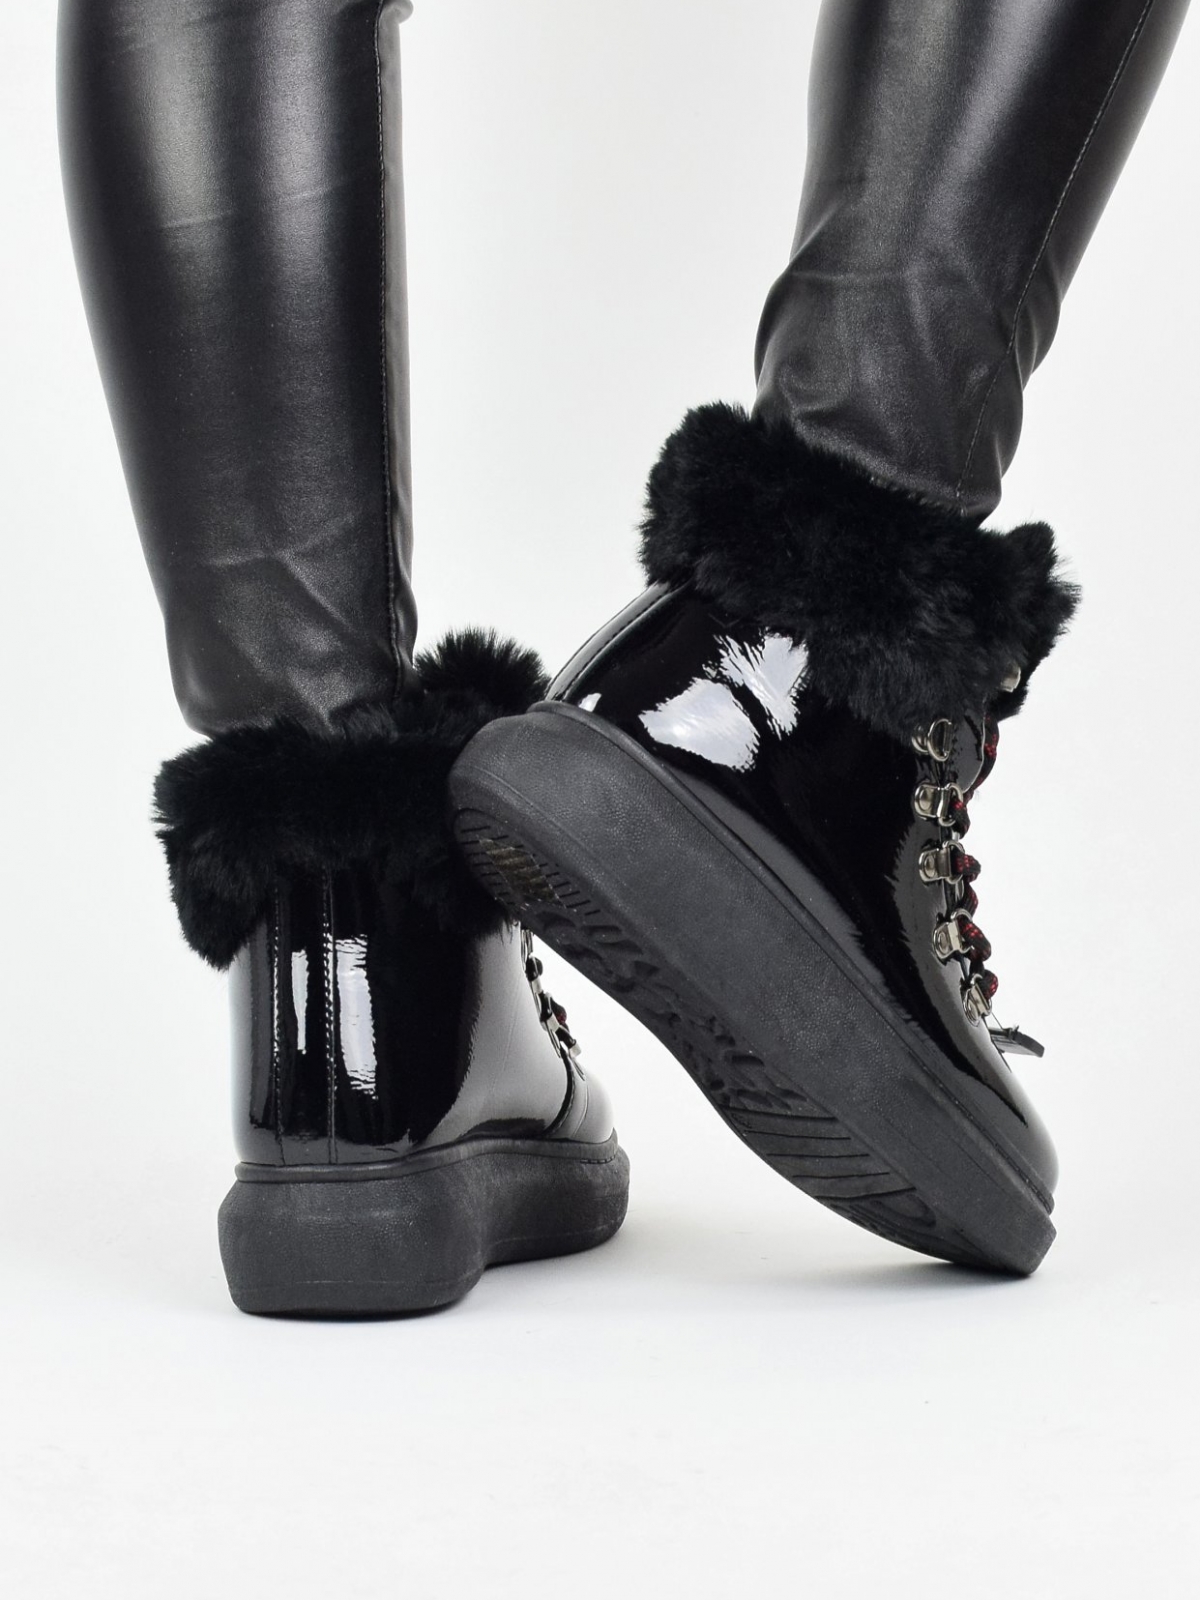 Warm lightweight lacquered boots in black